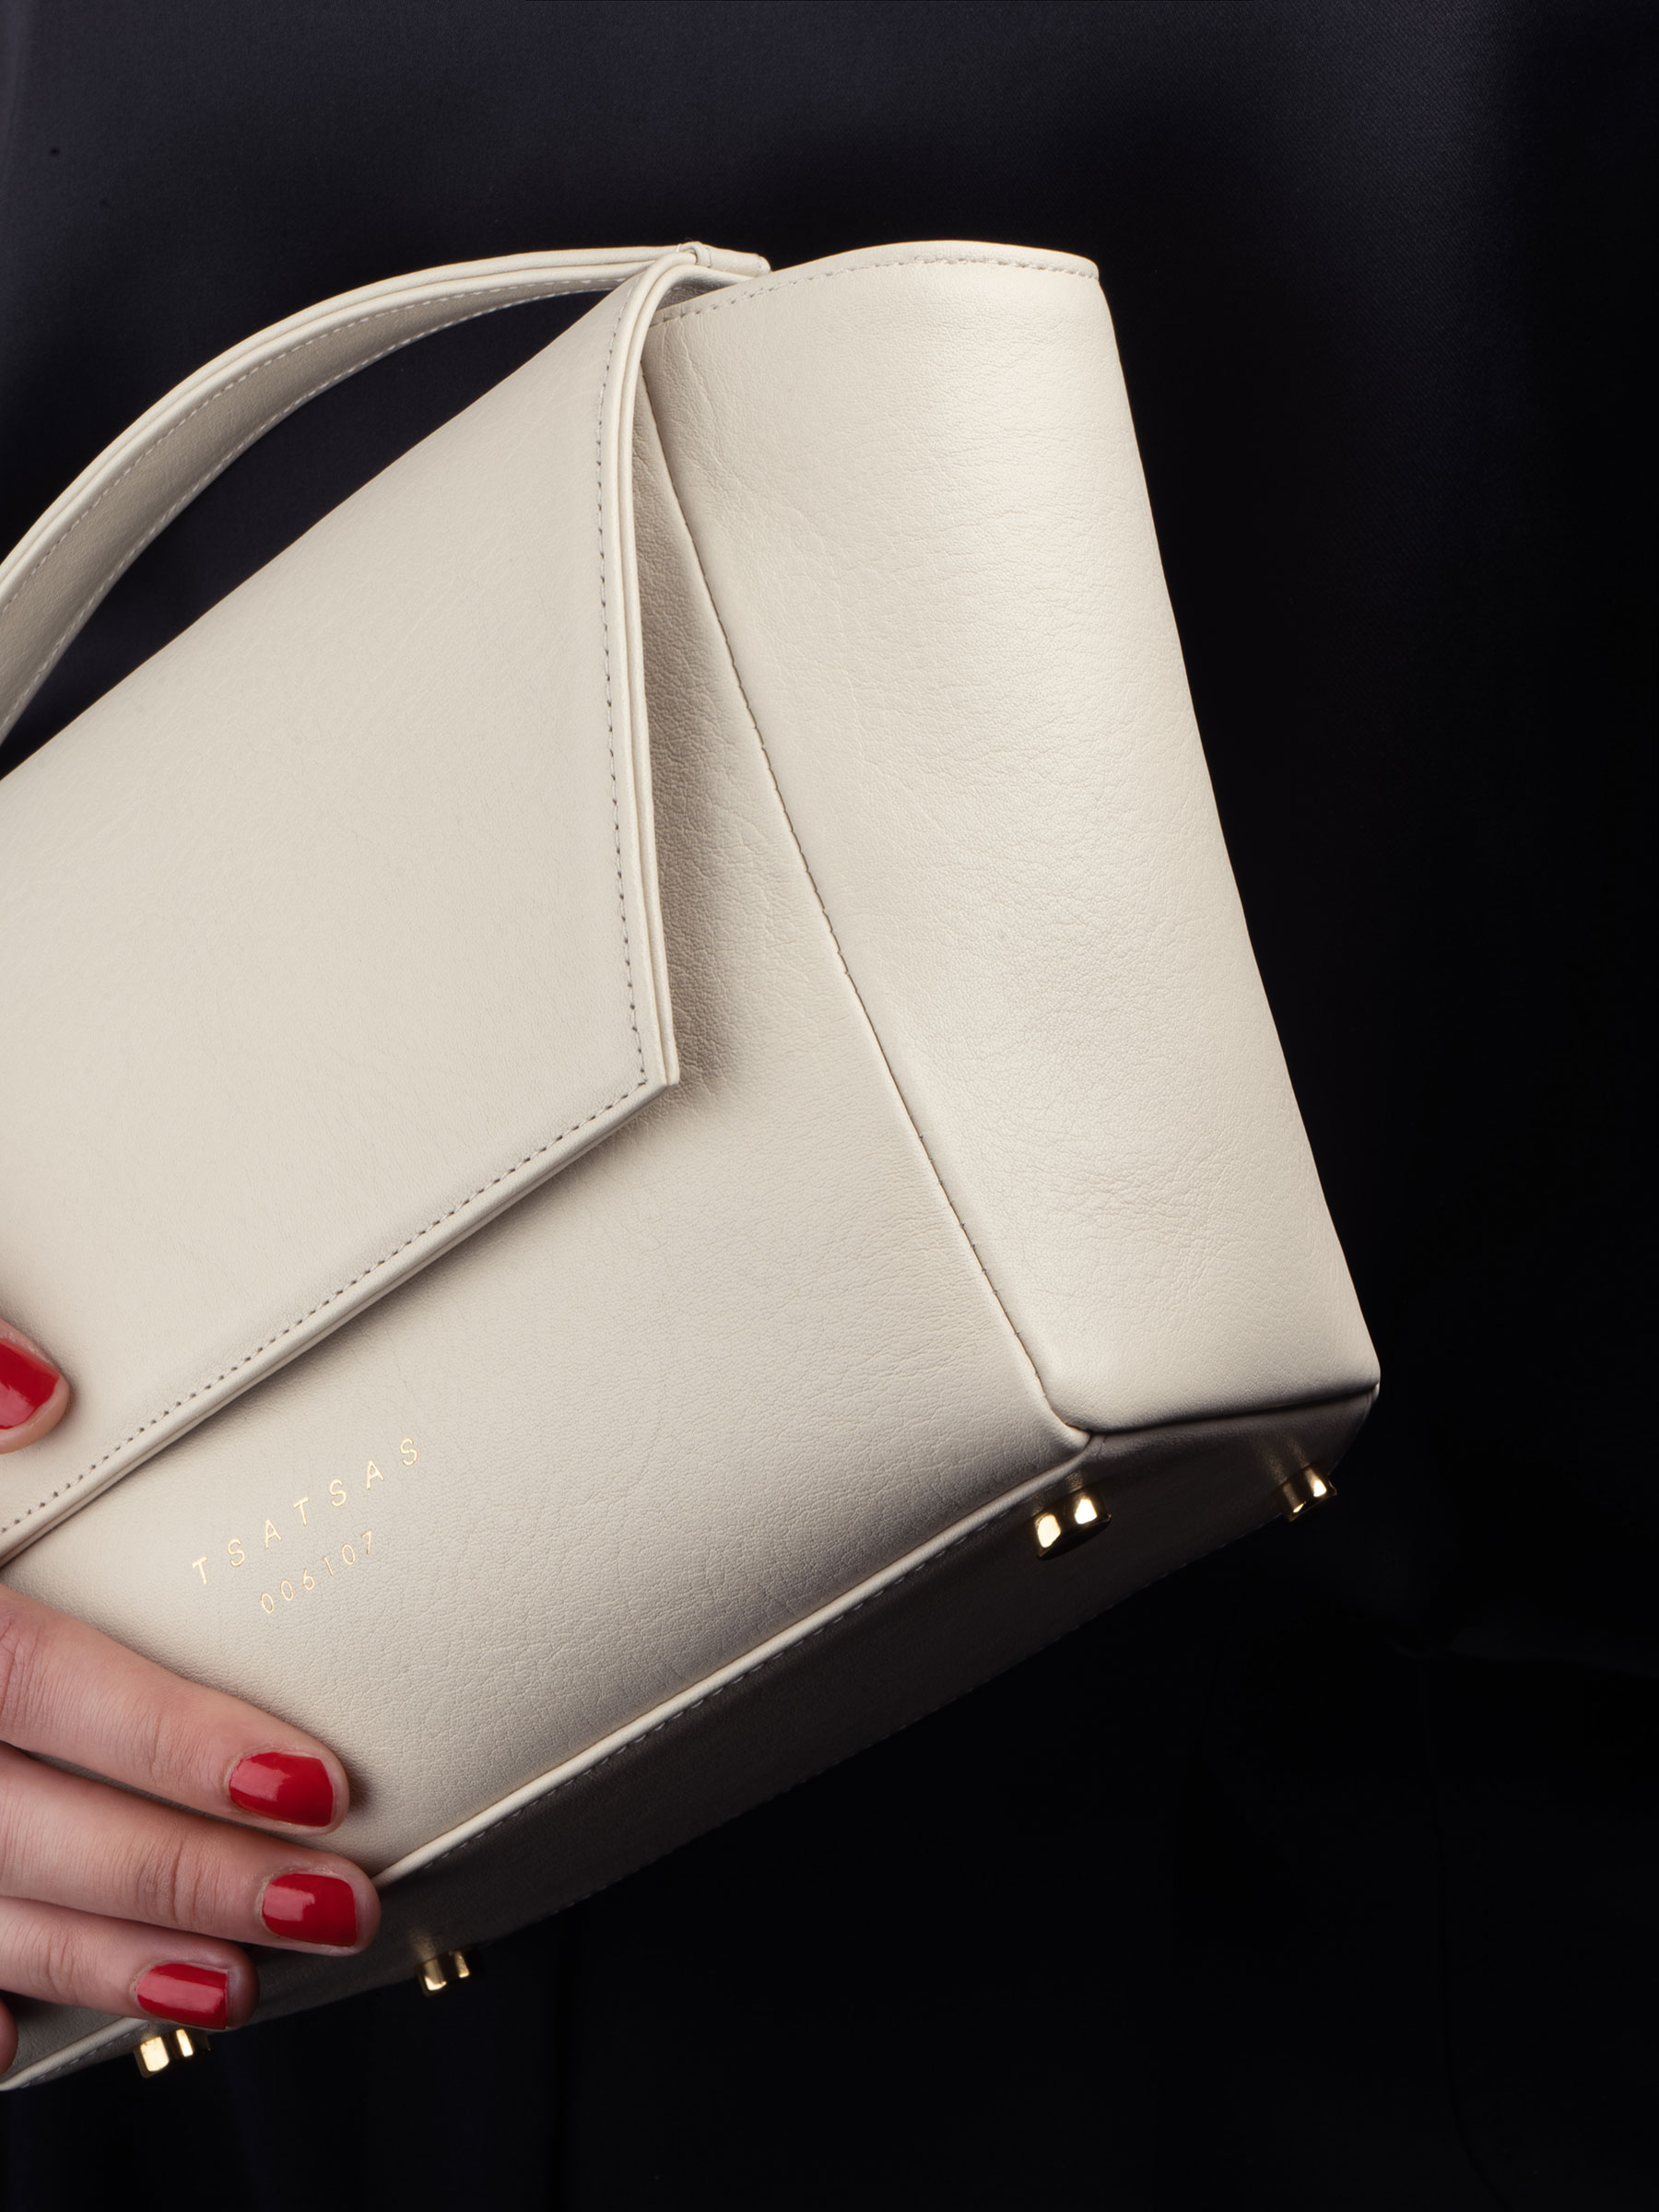 NEA 1 hand and shoulder bag in ivory calfskin leather